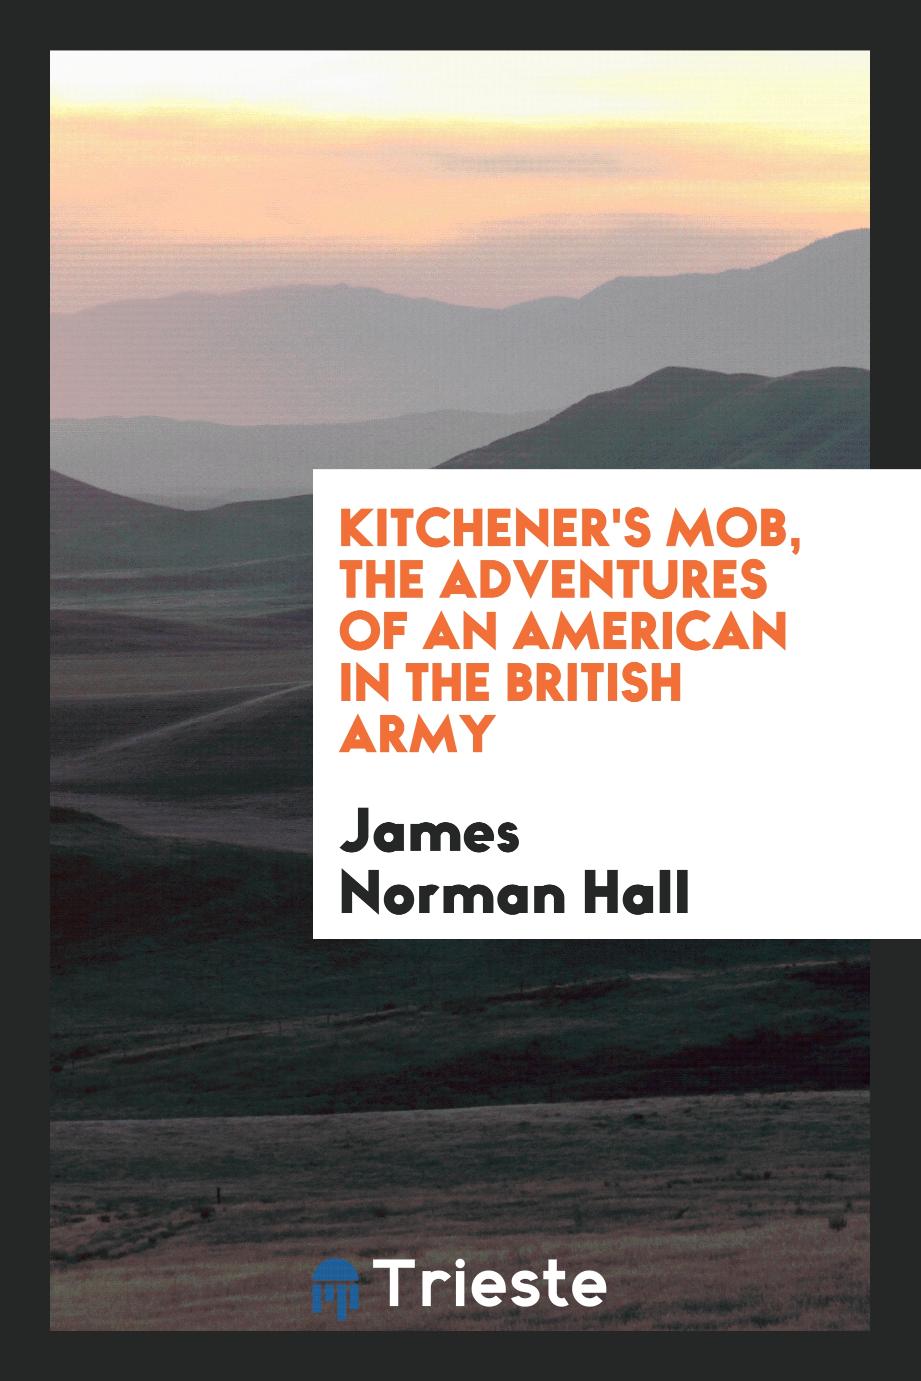 Kitchener's mob, the adventures of an American in the British Army